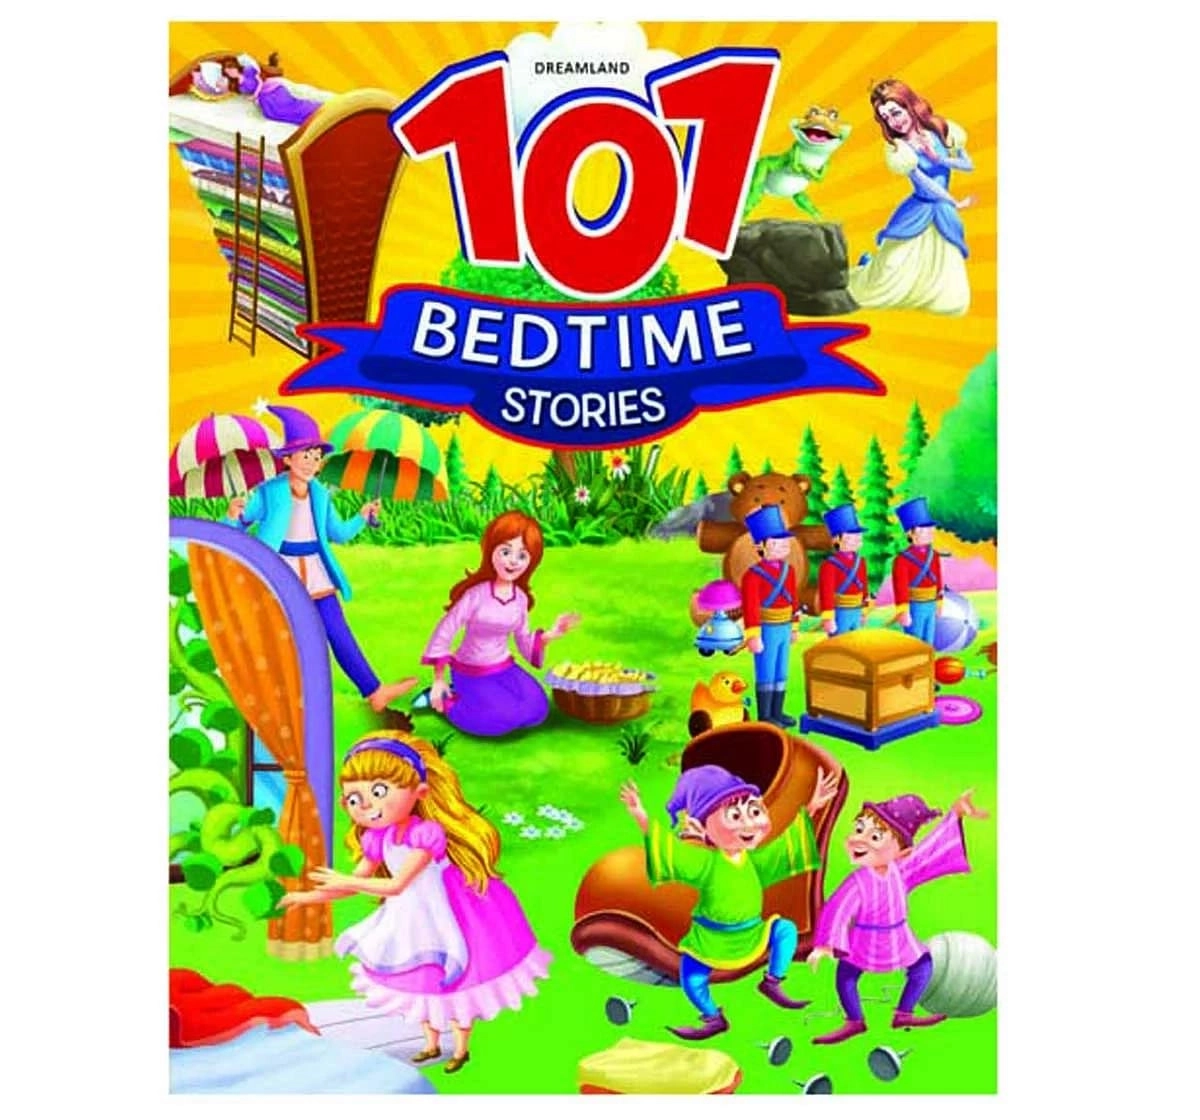 Dreamland Paper Back 101 Bed Time Stories Books for Kids 5Y+, Multicolour